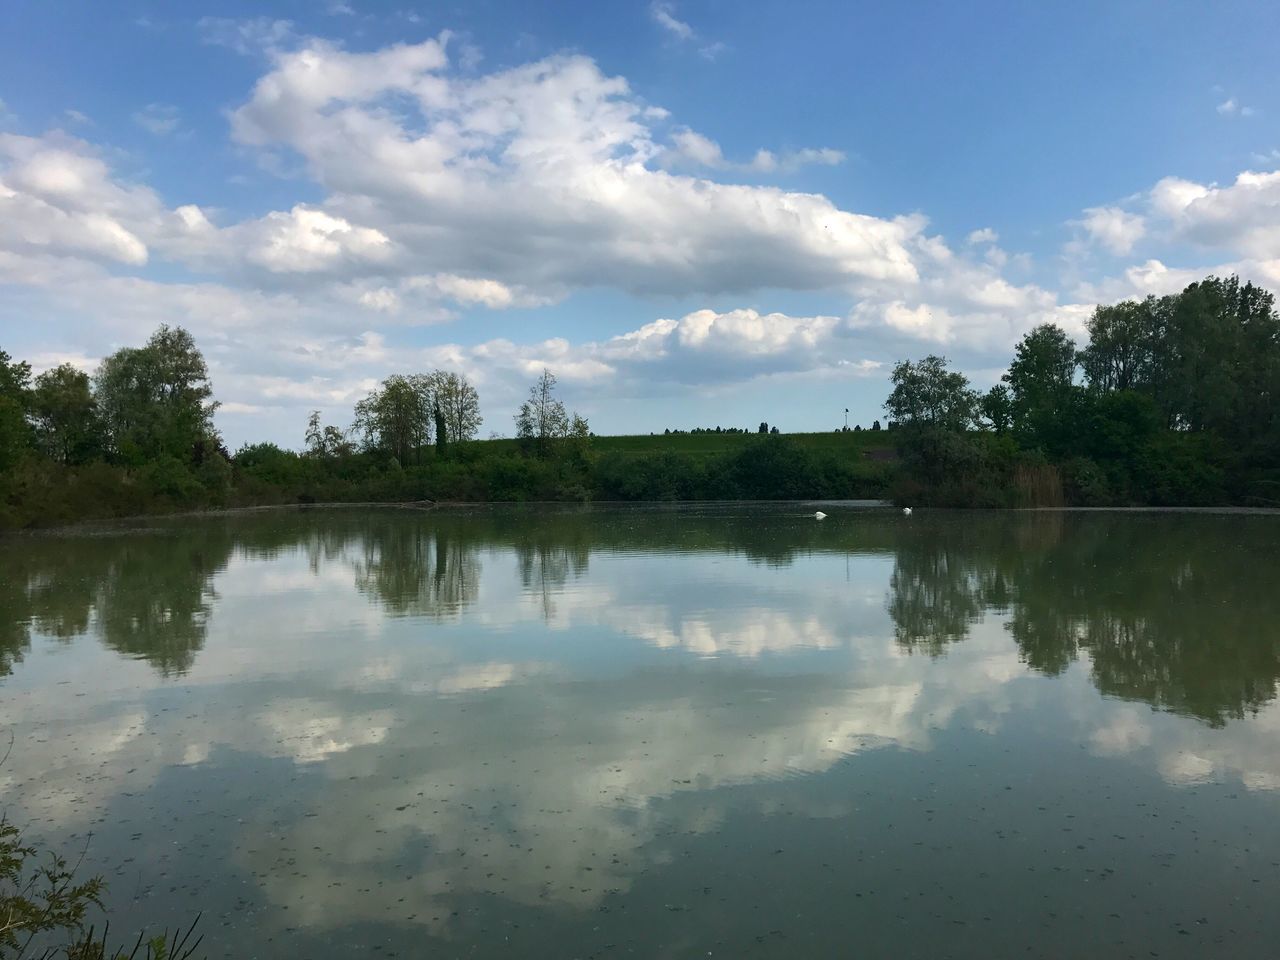 reflection, sky, water, tree, cloud - sky, nature, lake, outdoors, reflection lake, no people, backgrounds, landscape, day